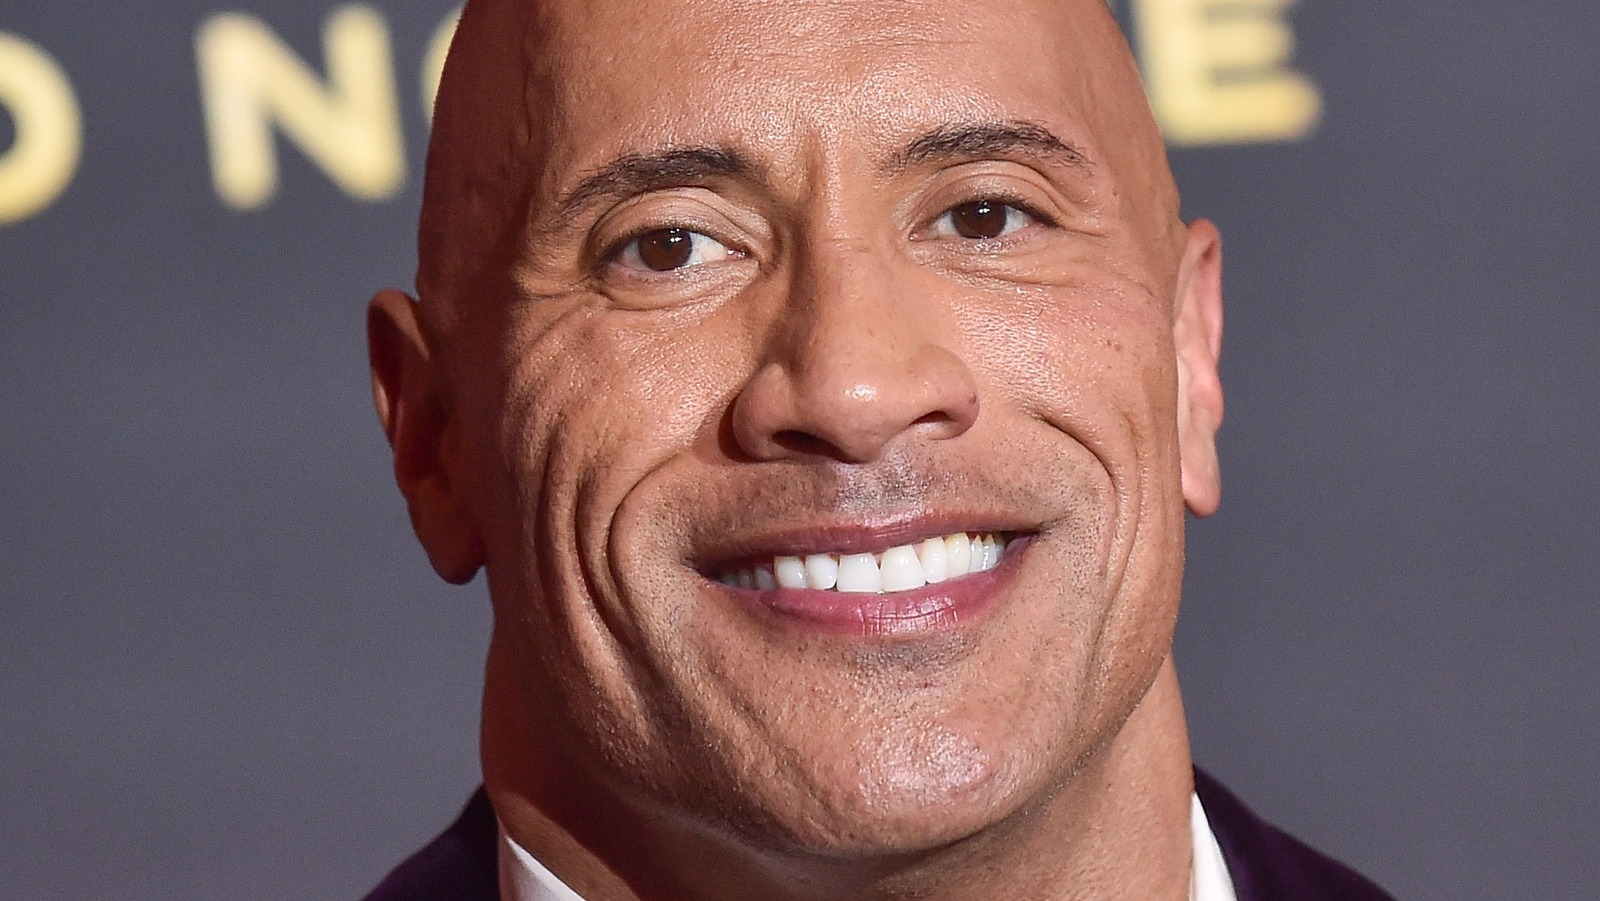 Face it, Dwayne 'The Rock' Johnson is a terrible actor